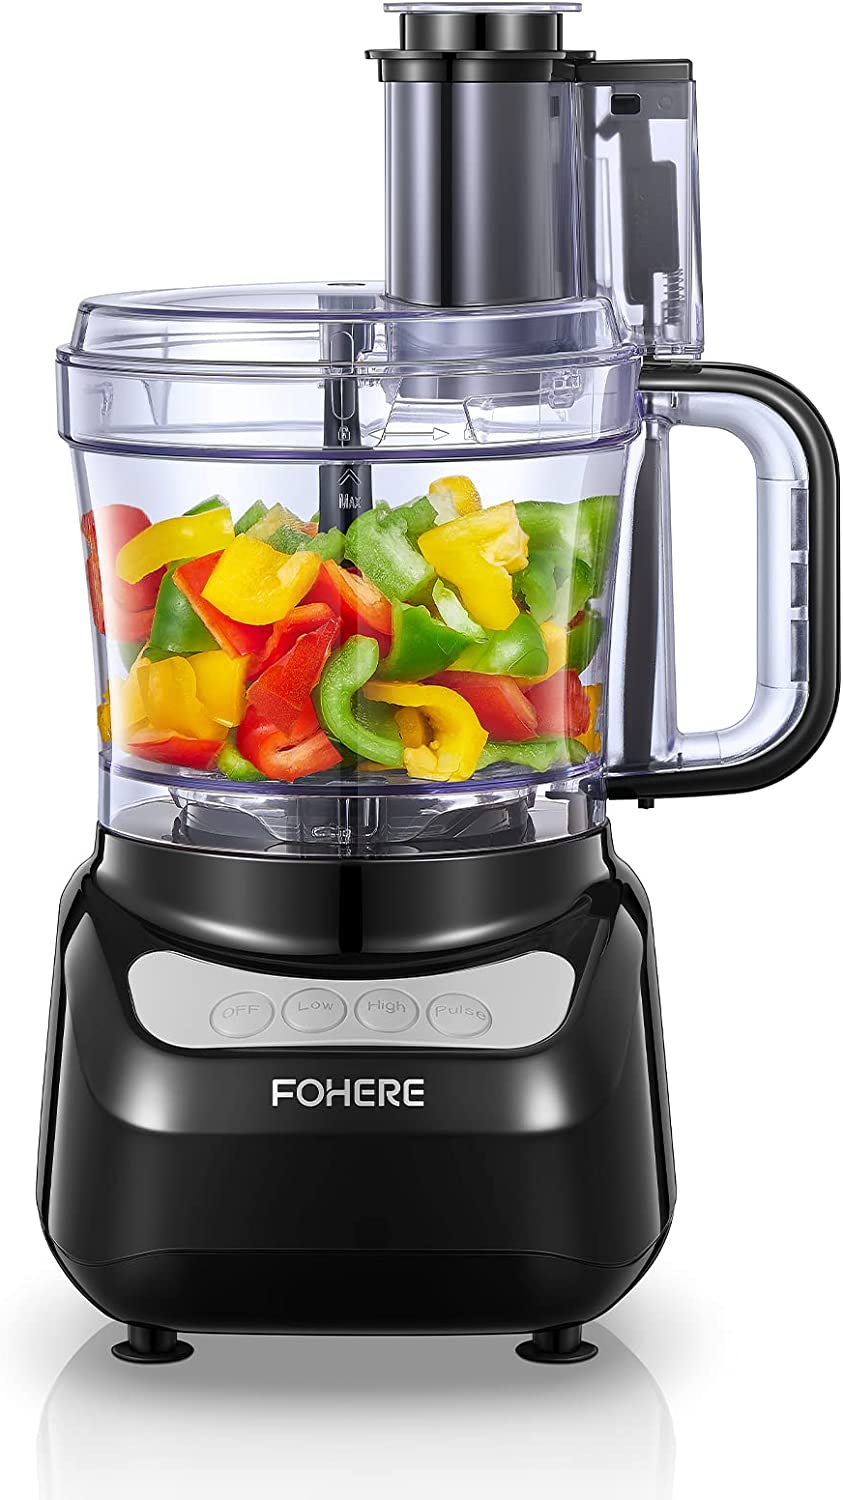 12 Cup Food Processor, 6 Functions for Chopping, Slicing